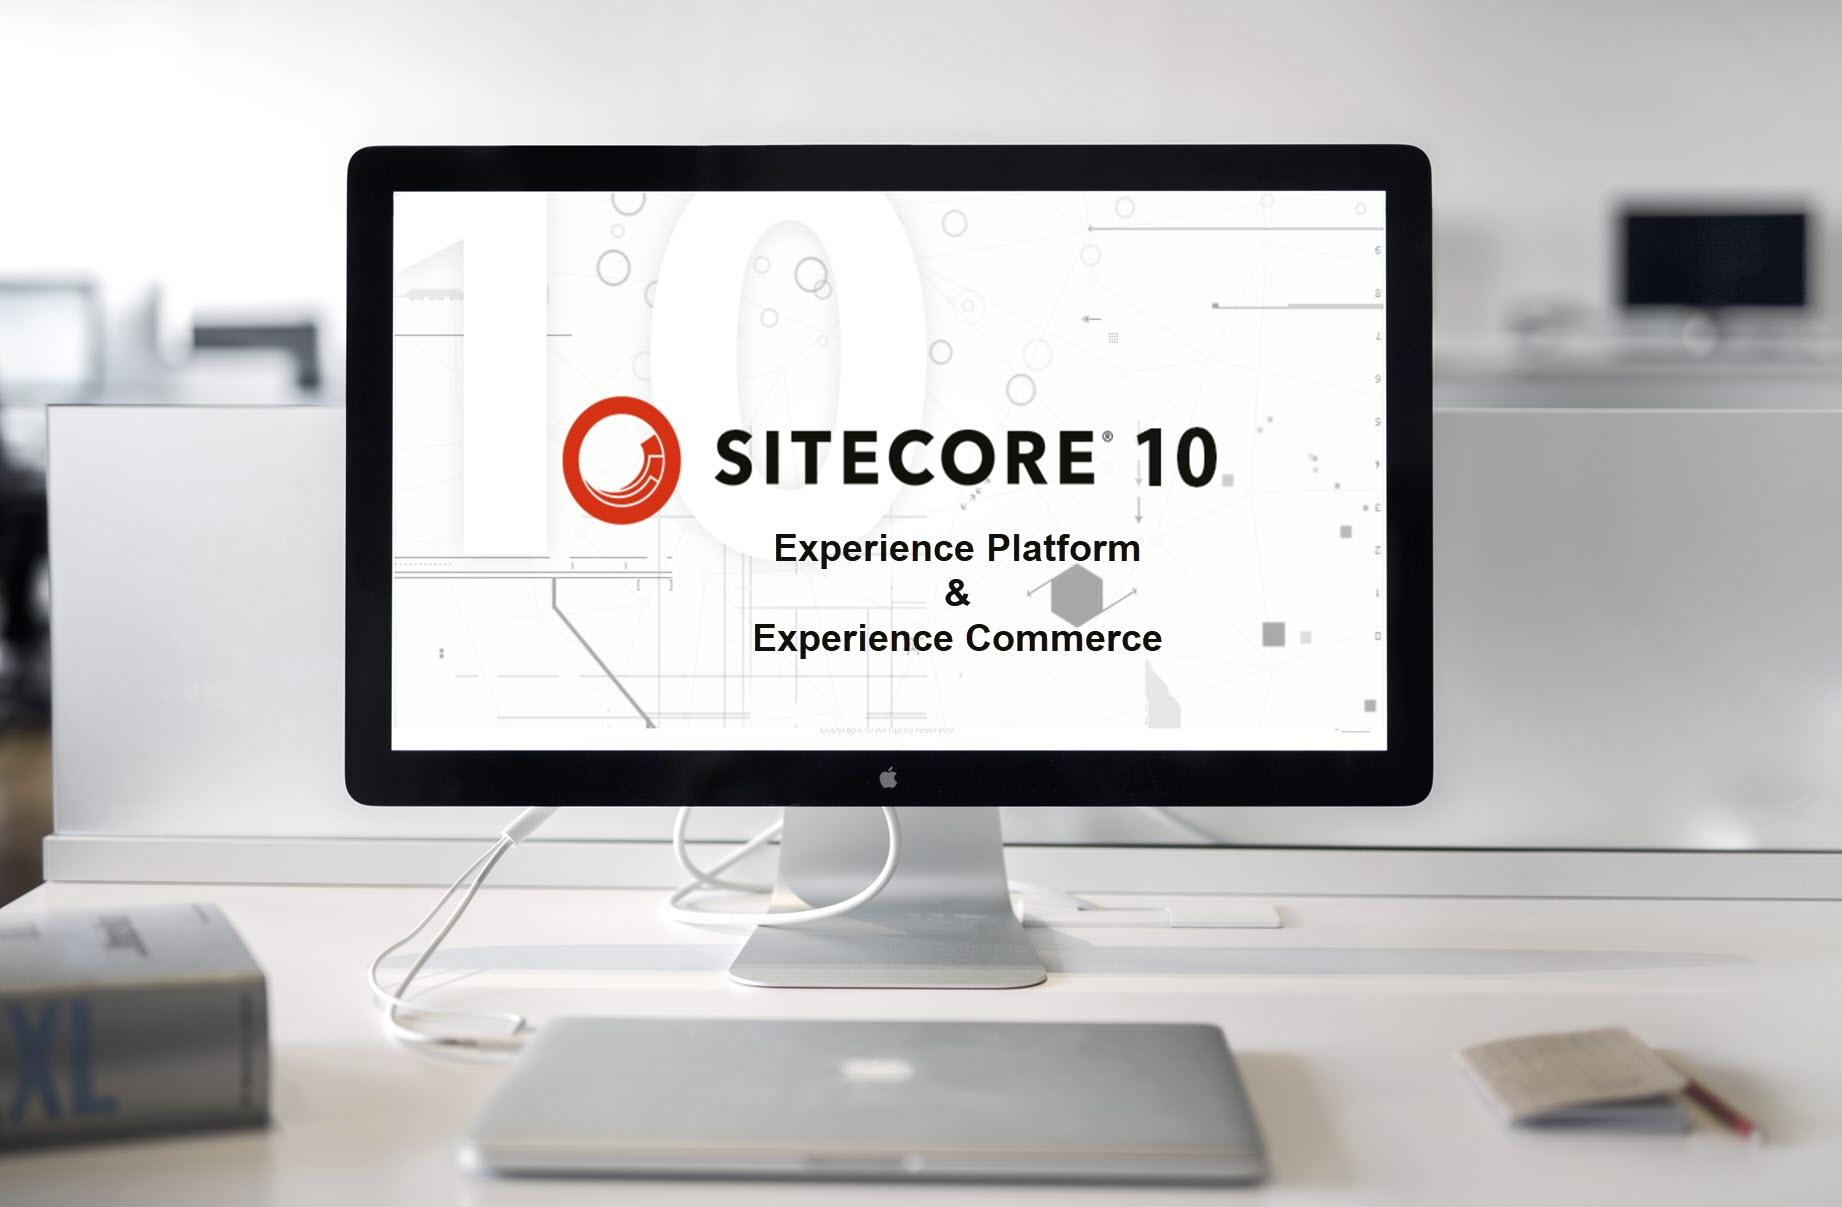 Conquer-the-Post-Pandemic-World-with-Revolutionary-10th-Version-of-Sitecore-Solutions-1